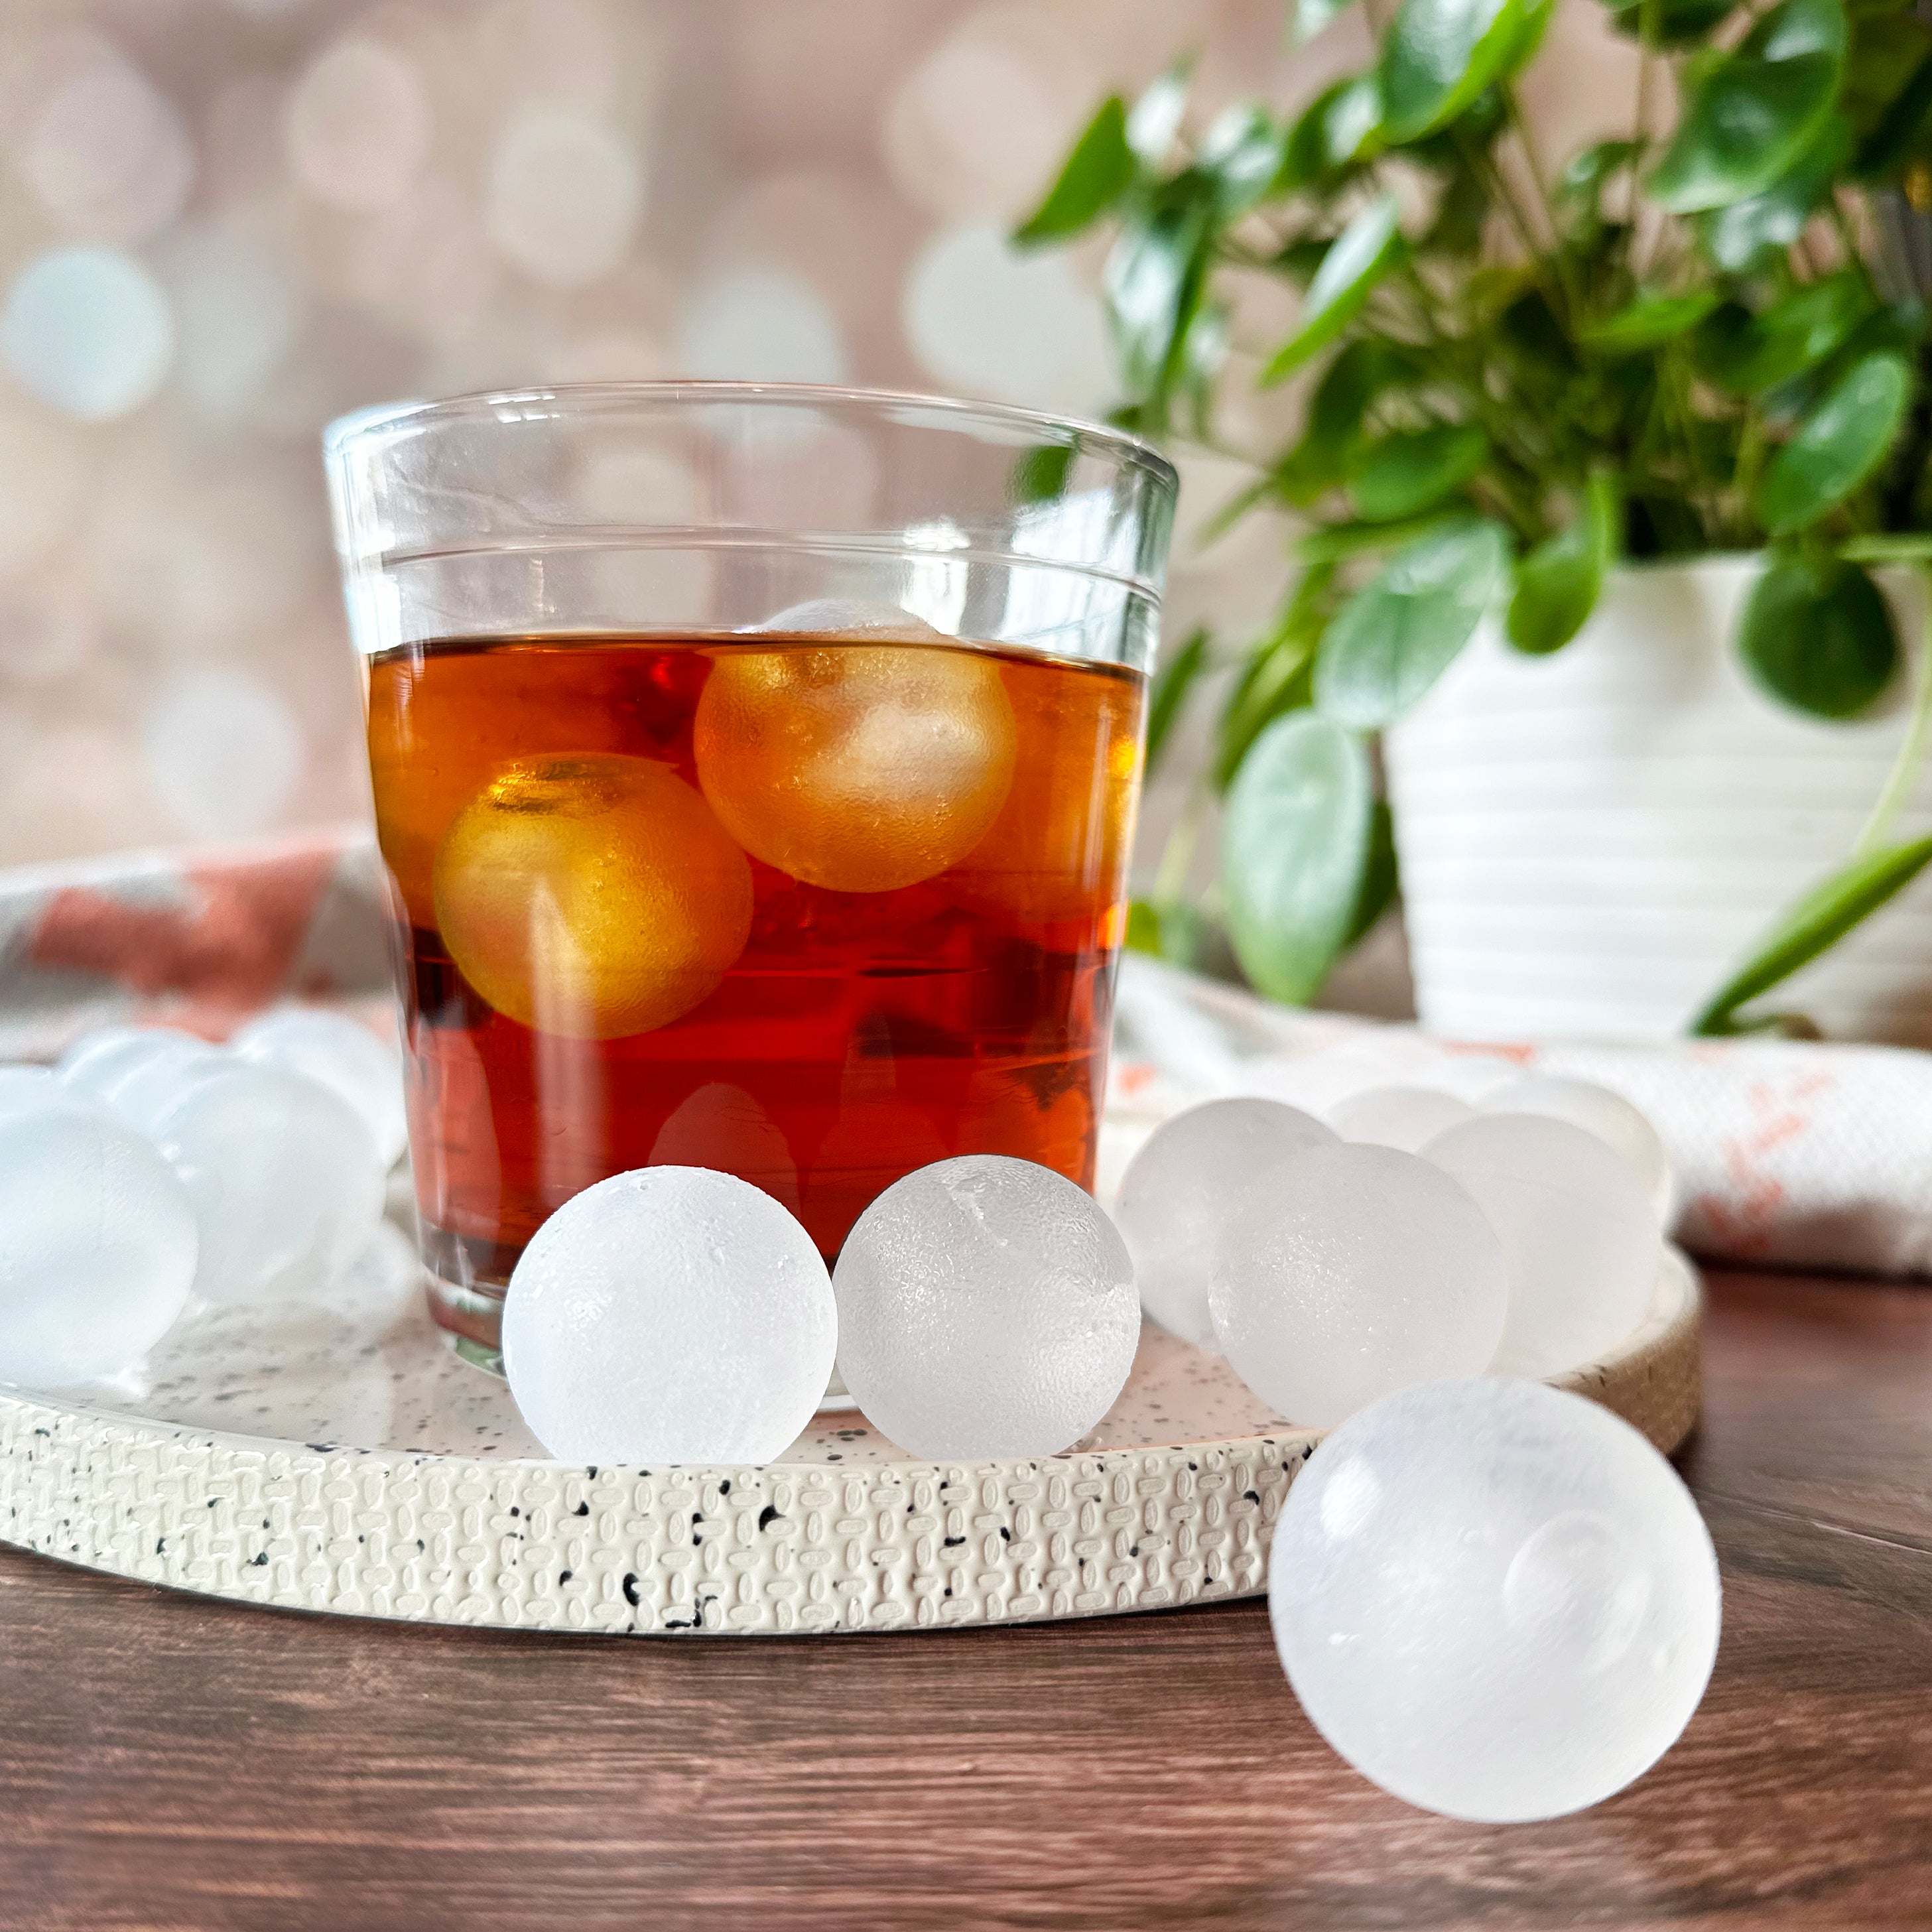 Ice spheres for drinks